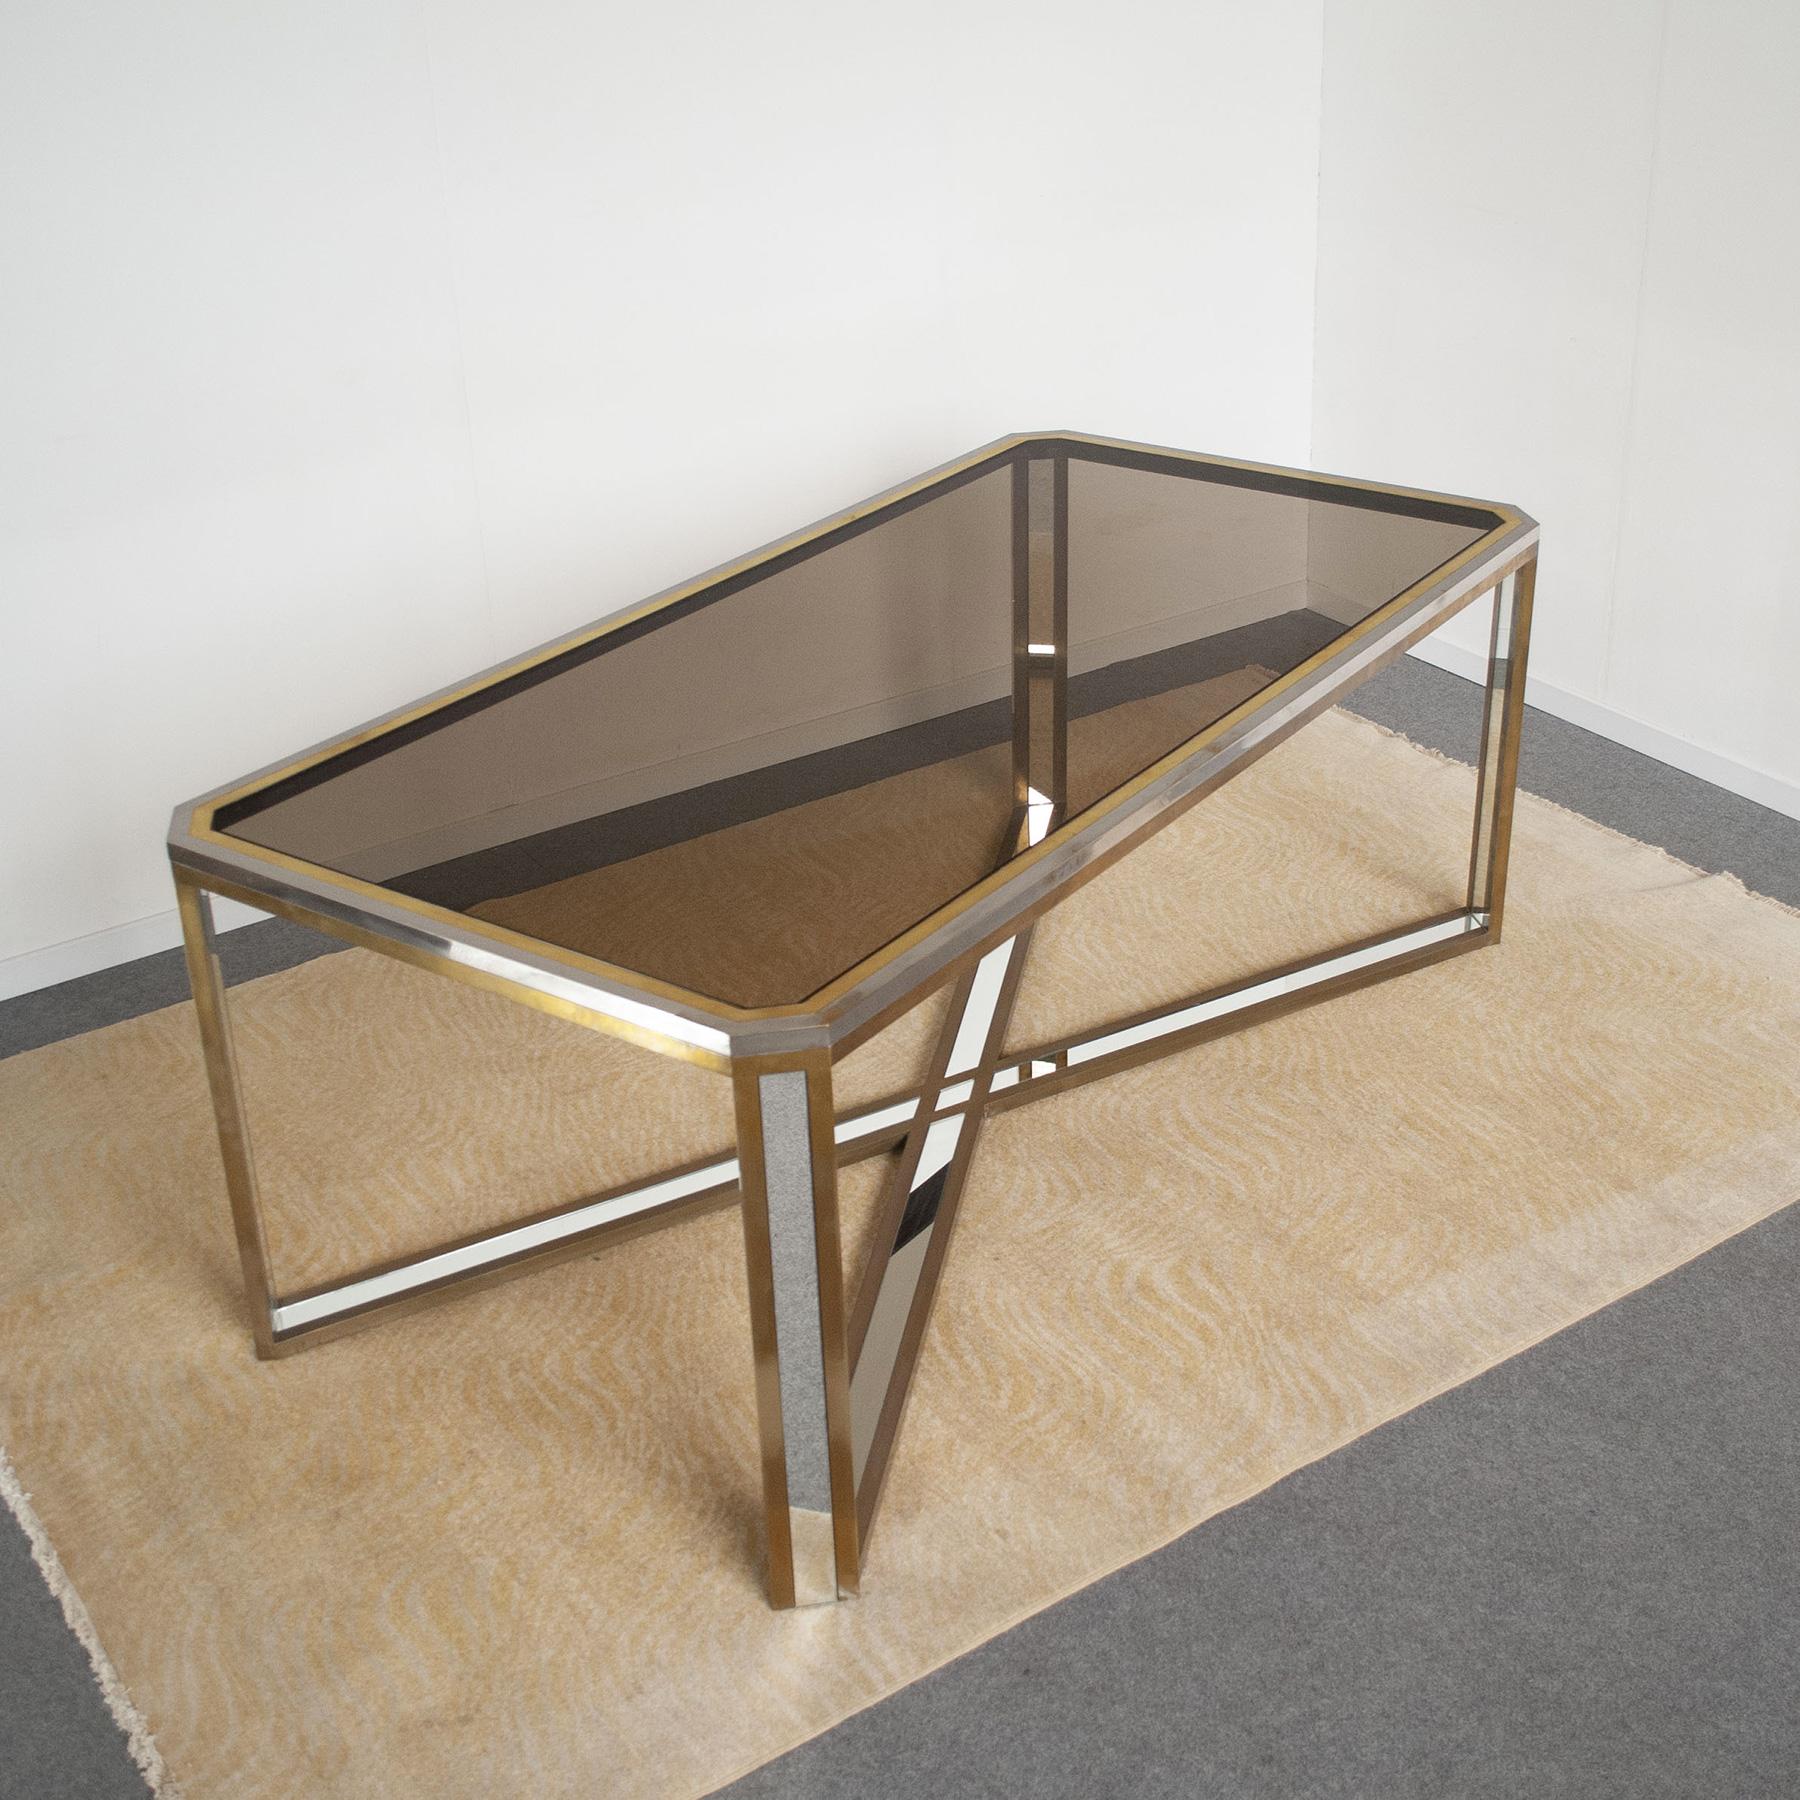 Romeo Rega 1970s Italian Midcentury Table in Stainless Steel, brass and Mirror For Sale 4